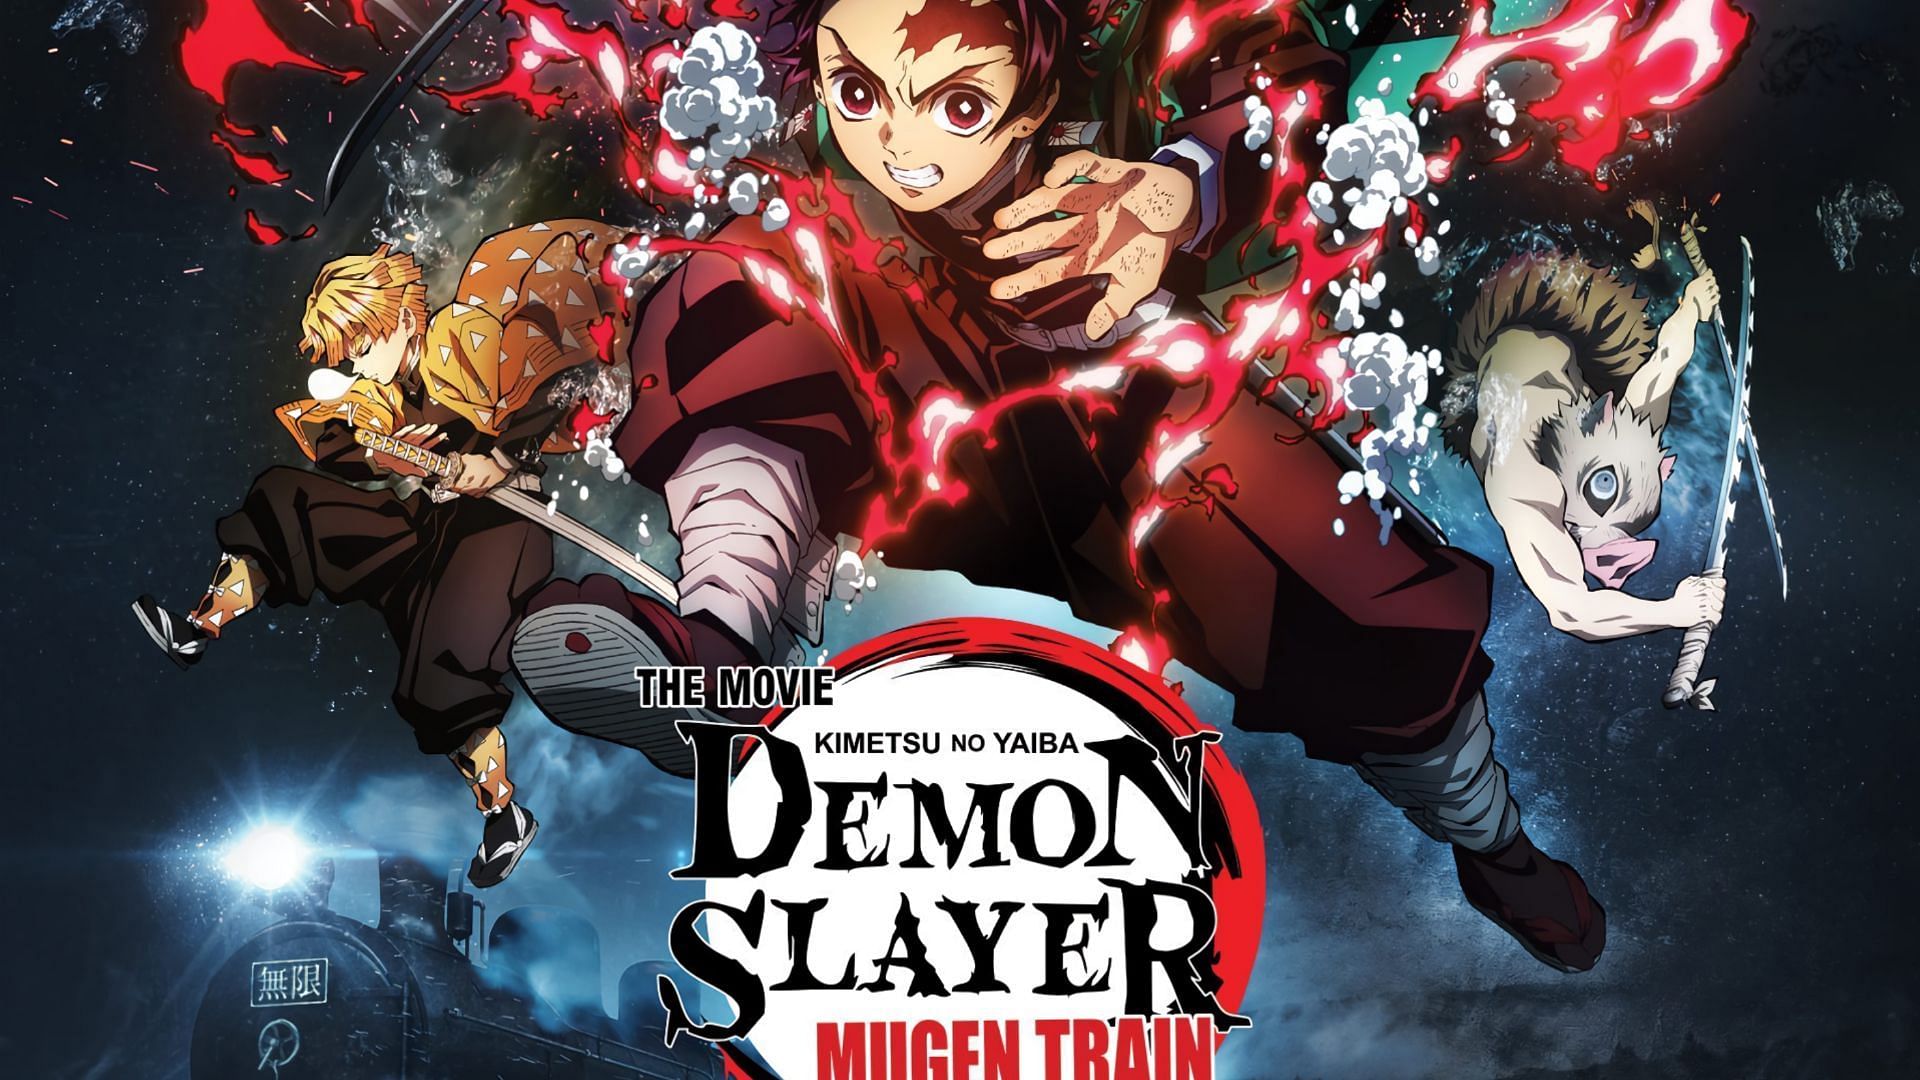 Demon Slayer Season 2: Full list of episodes and watch order